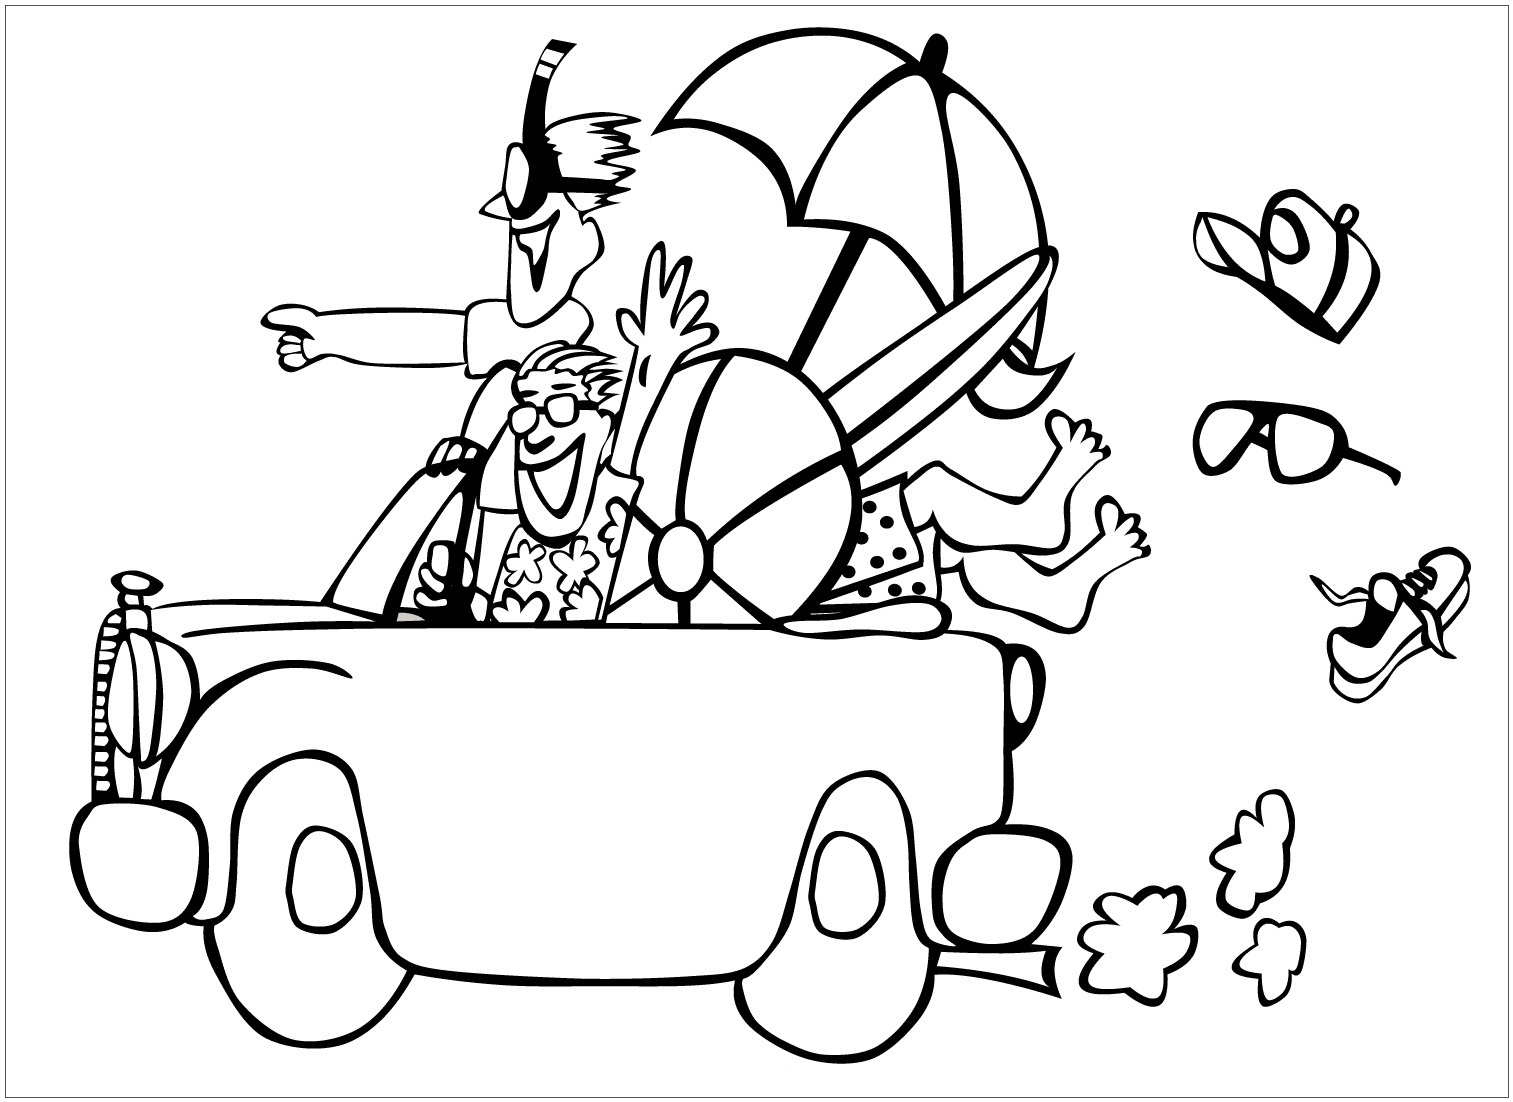 Download Summer Coloring Pages for Kids. Print them All for Free.